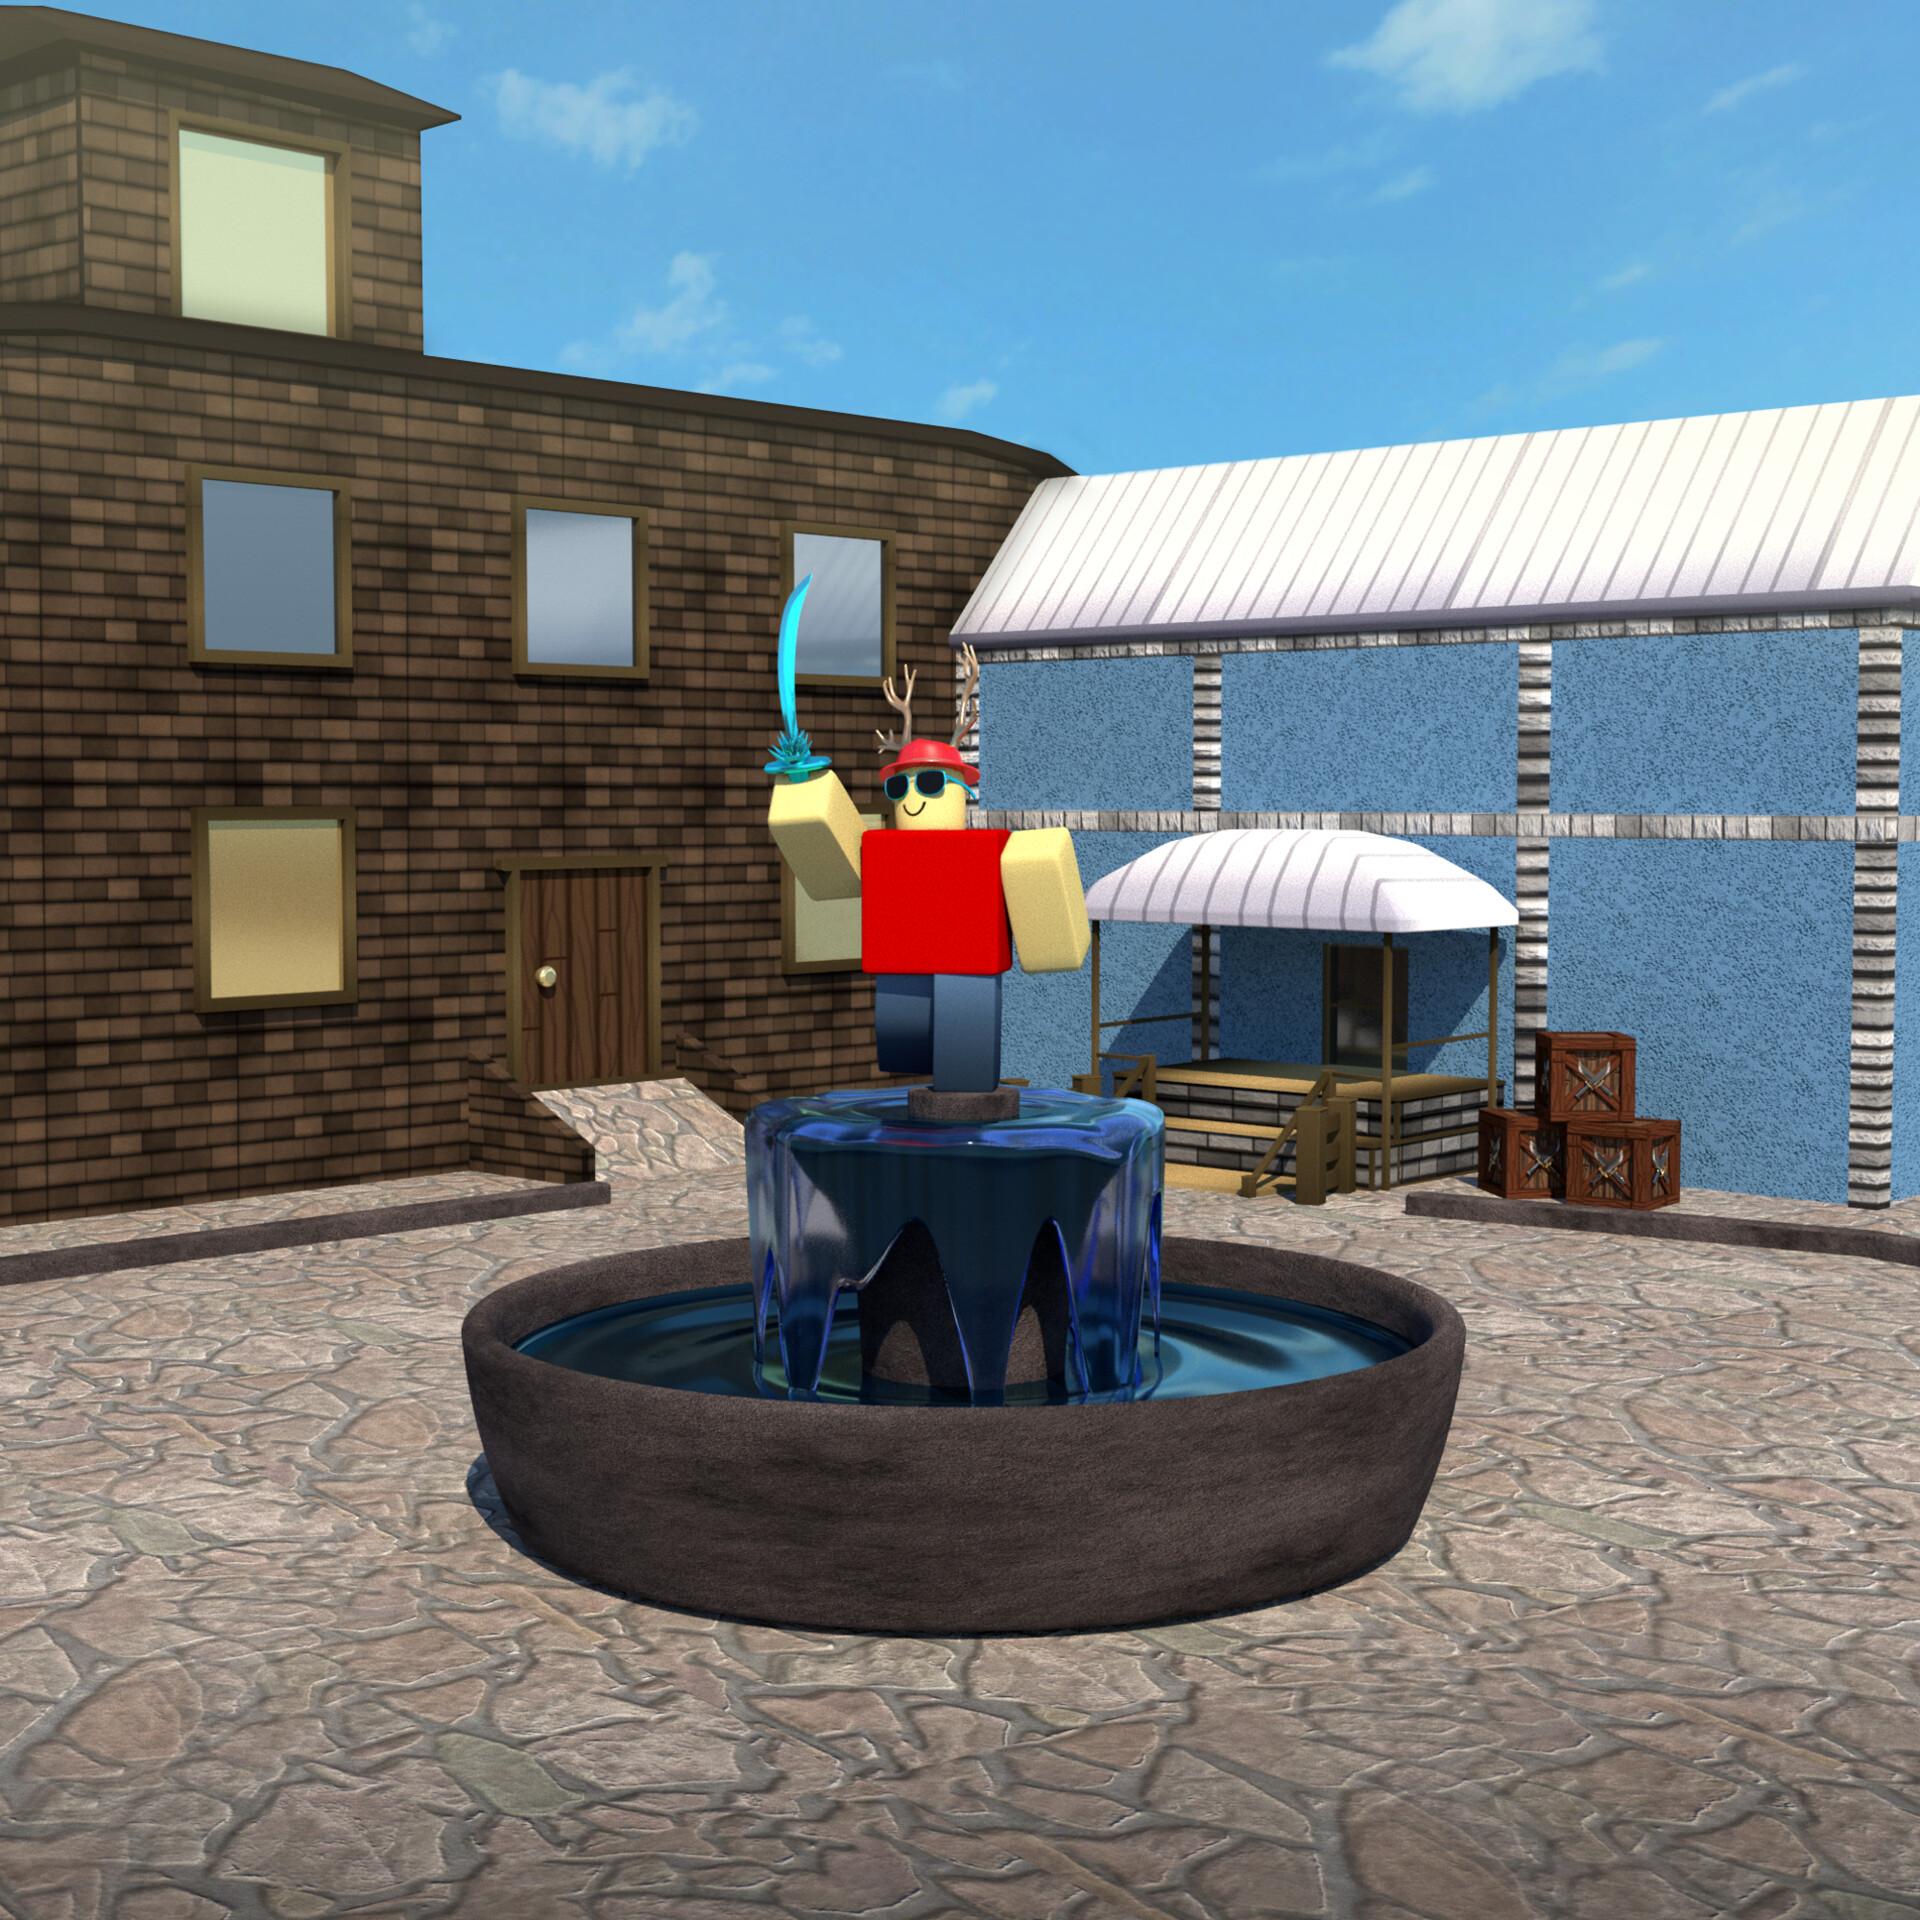 Lily on X: New item with effects coming soon! This MM2 Crown might be the  new Prime Gaming item for Dec, which means there will probs be an in-game  item too? #Roblox #